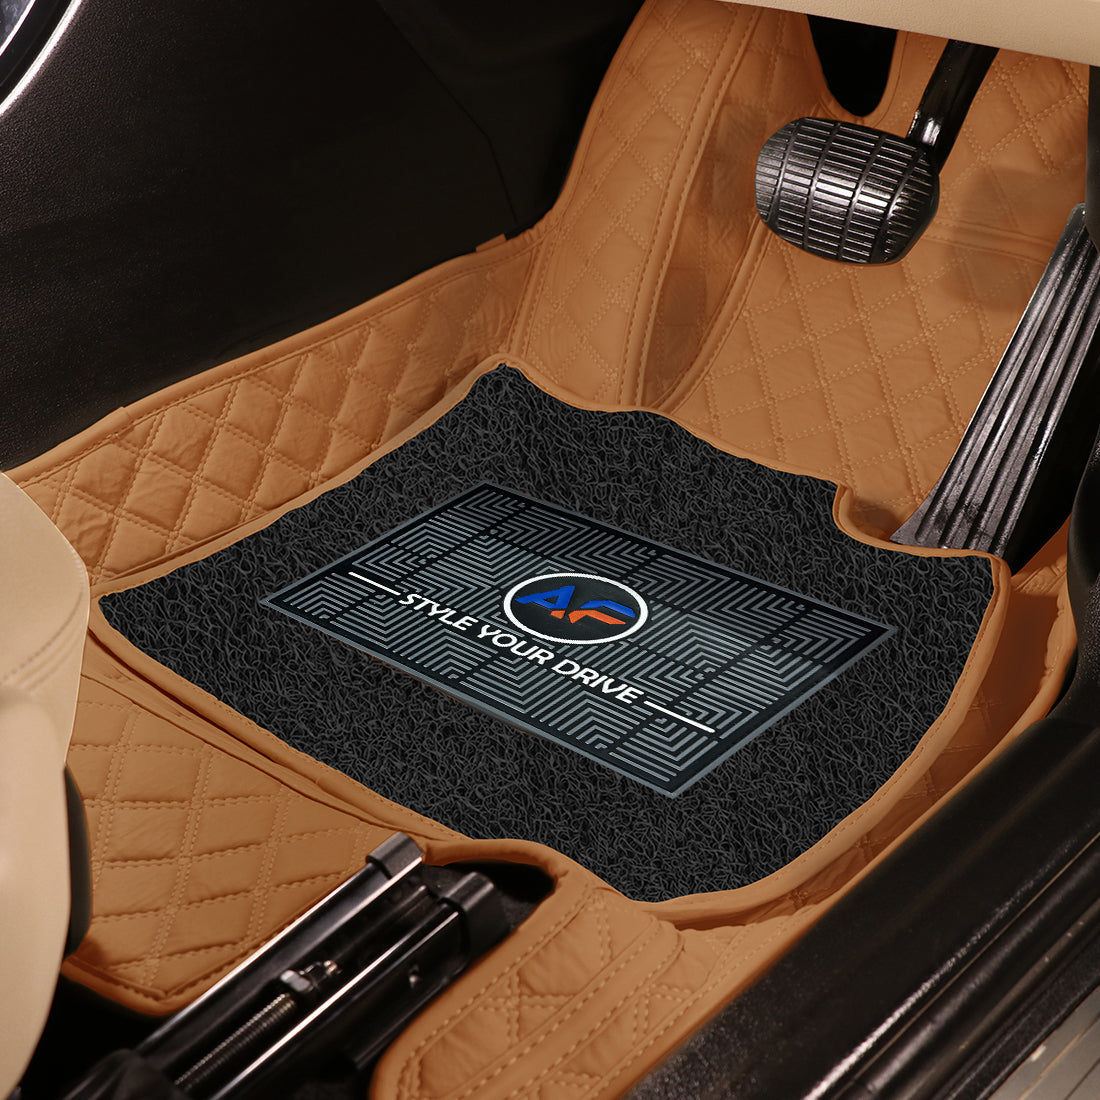 Land Rover Defender (5 Seater) 2022-7D Luxury Car Mat, All Weather Proof, Anti-Skid, 100% Waterproof & Odorless with Unique Diamond Fish Design (24mm Luxury PU Leather, 2 Rows)